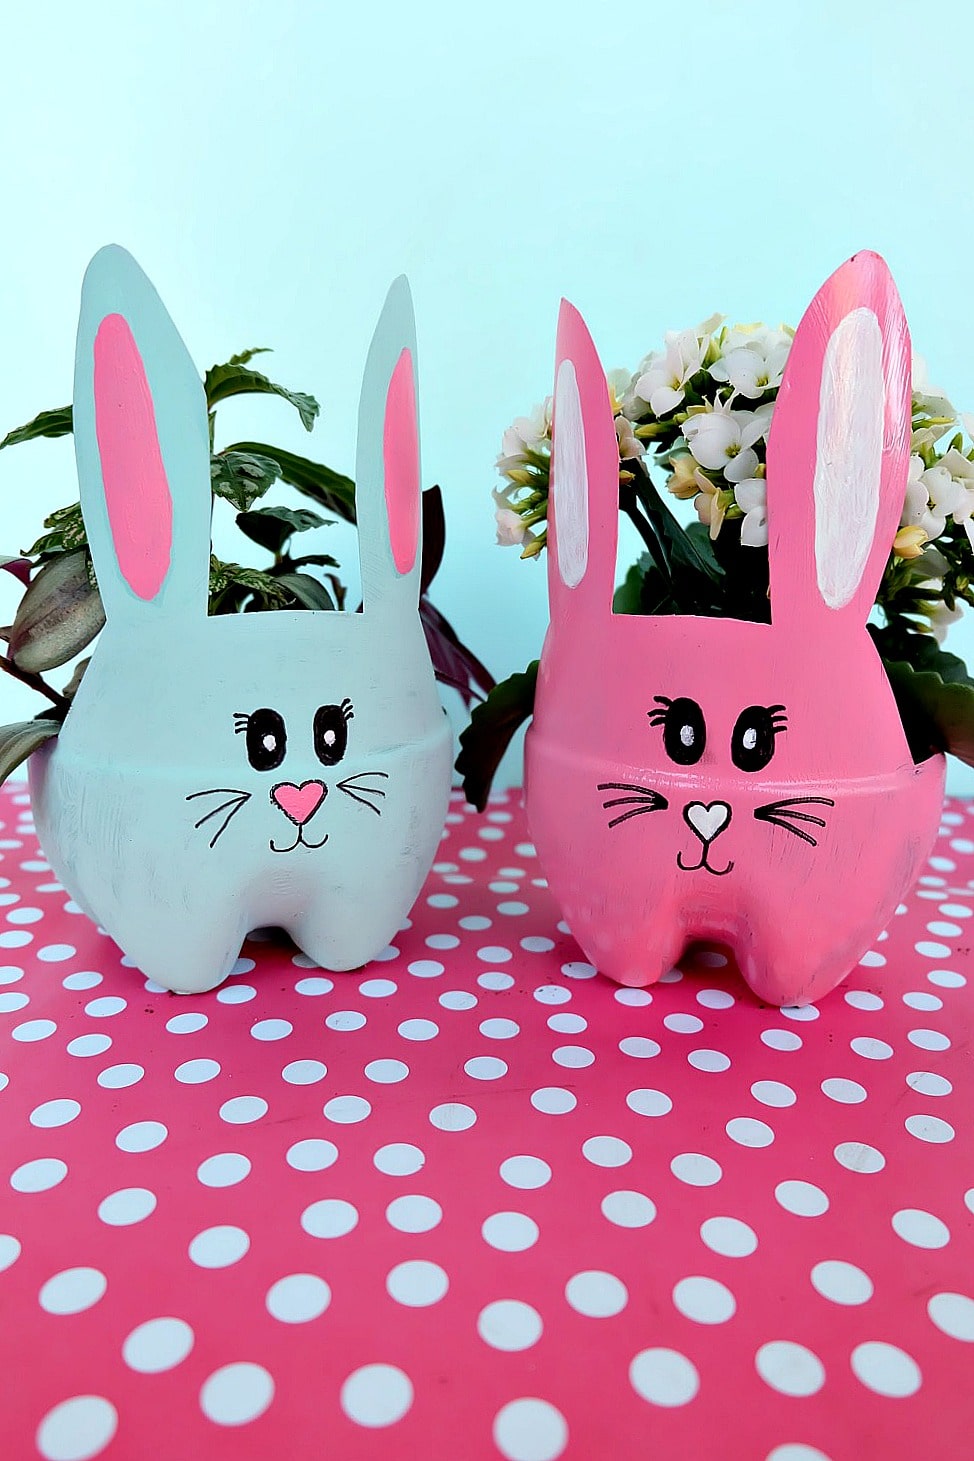 Easter Bunny Garden Containers from Upcycled Bottles